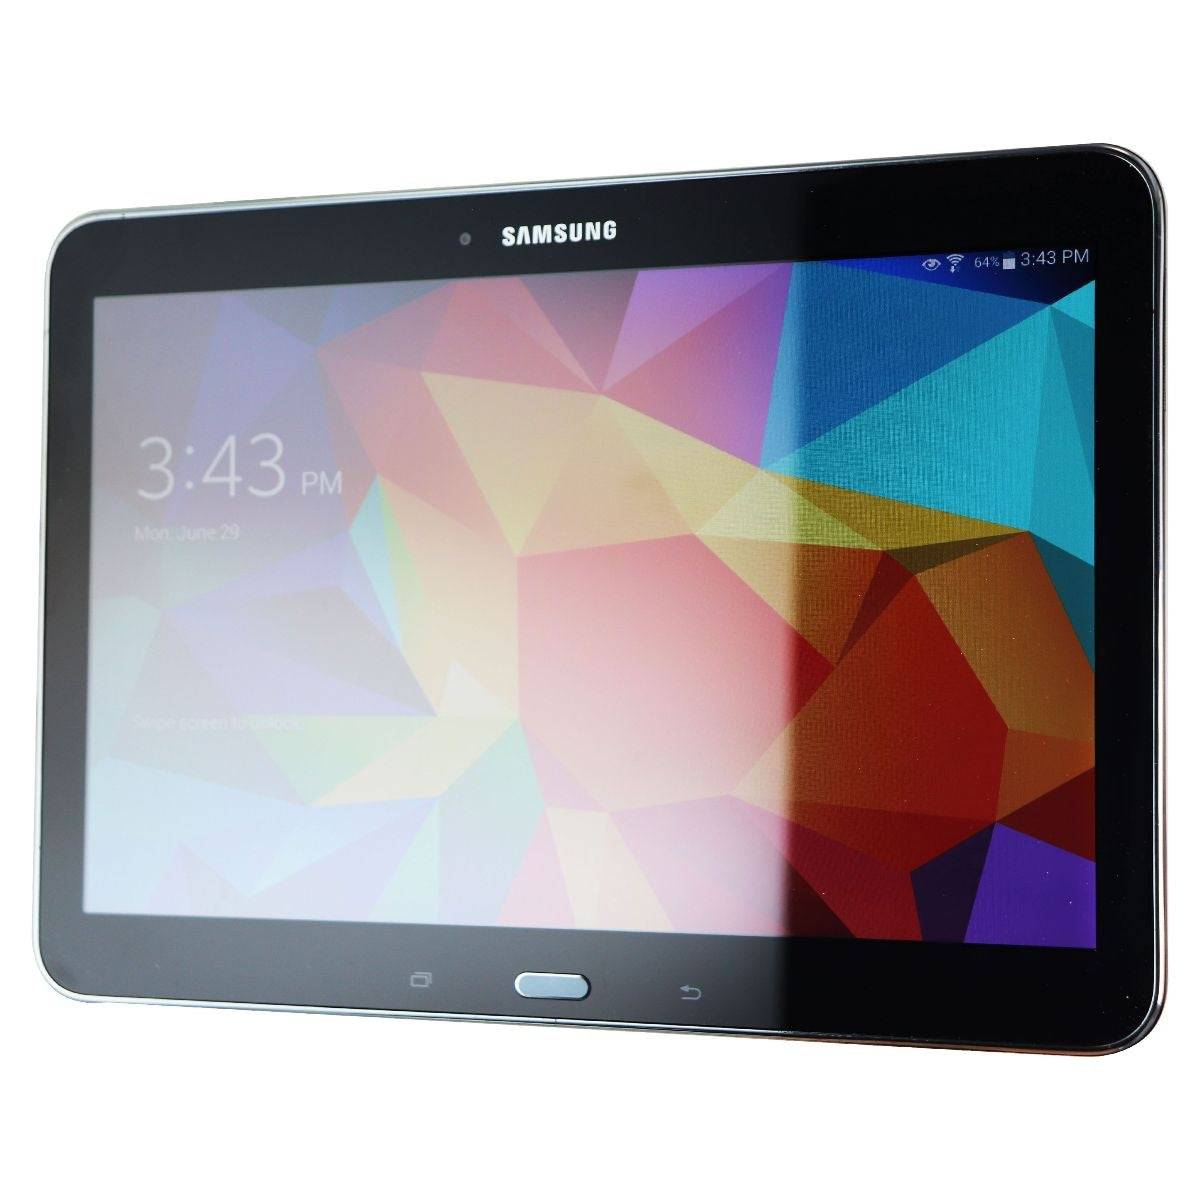 Samsung Galaxy Tab 4 (10.1-inch) Tablet (SM-T530) Wi-Fi Only - 16GB / Black iPads, Tablets & eBook Readers Samsung    - Simple Cell Bulk Wholesale Pricing - USA Seller